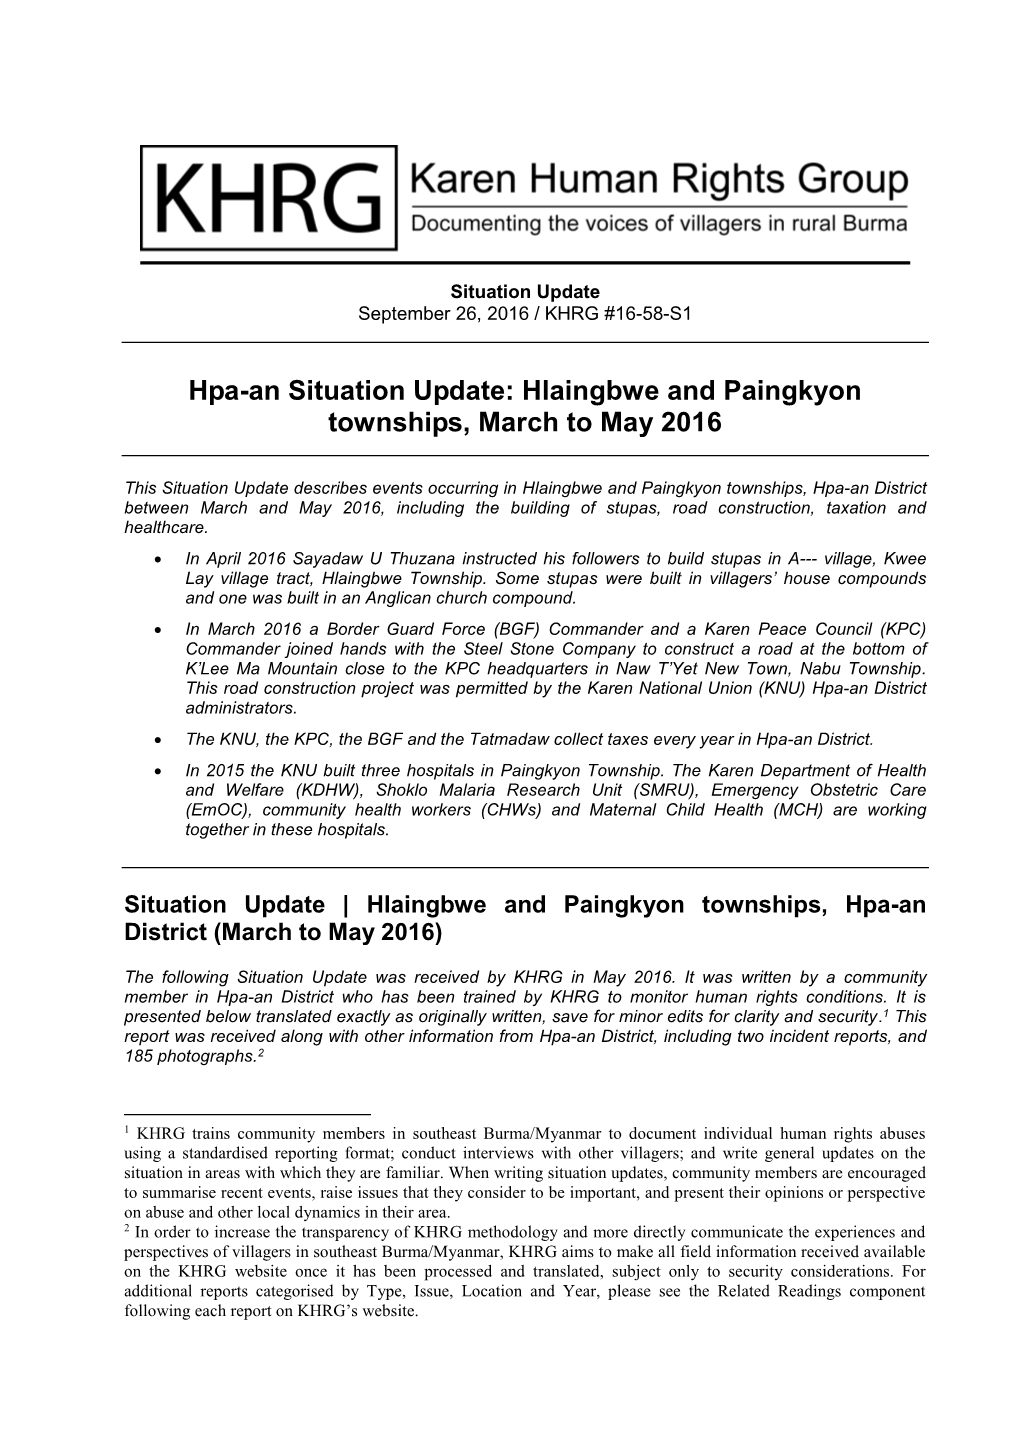 Hpa-An Situation Update: Hlaingbwe and Paingkyon Townships, March to May 2016